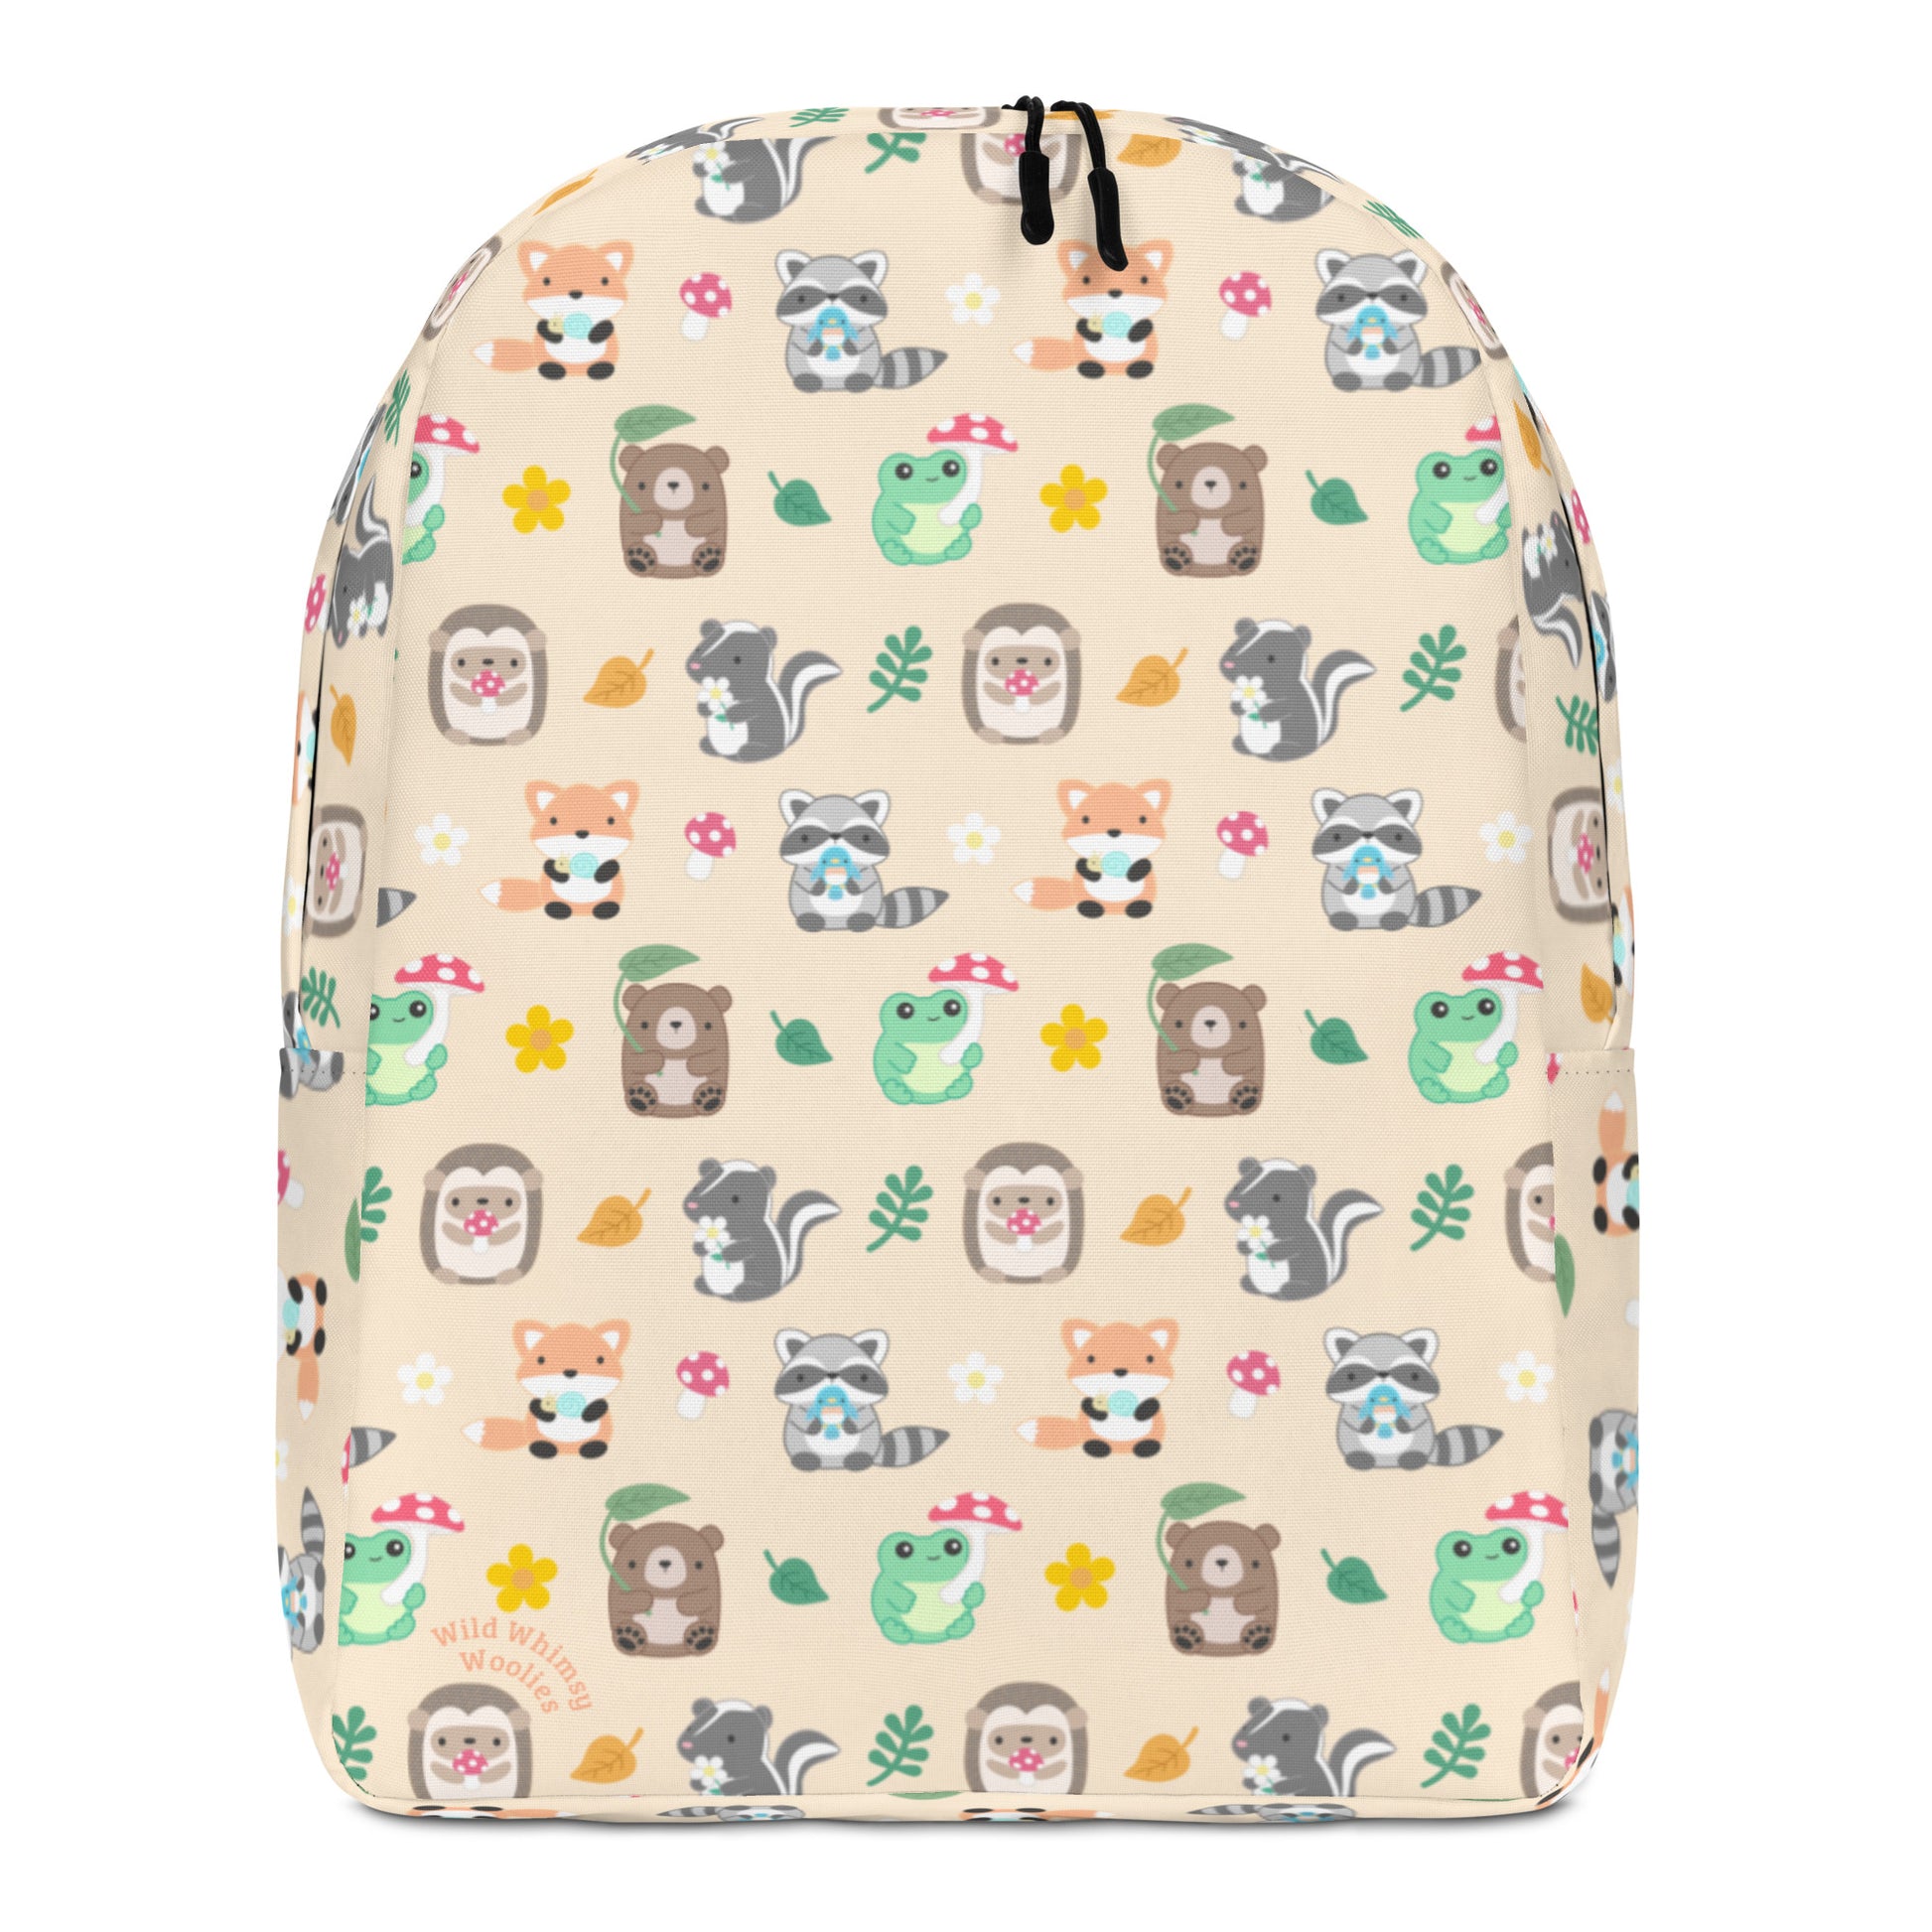 Woodland Animals Minimalist Backpack - Peach by Wild Whimsy Woolies